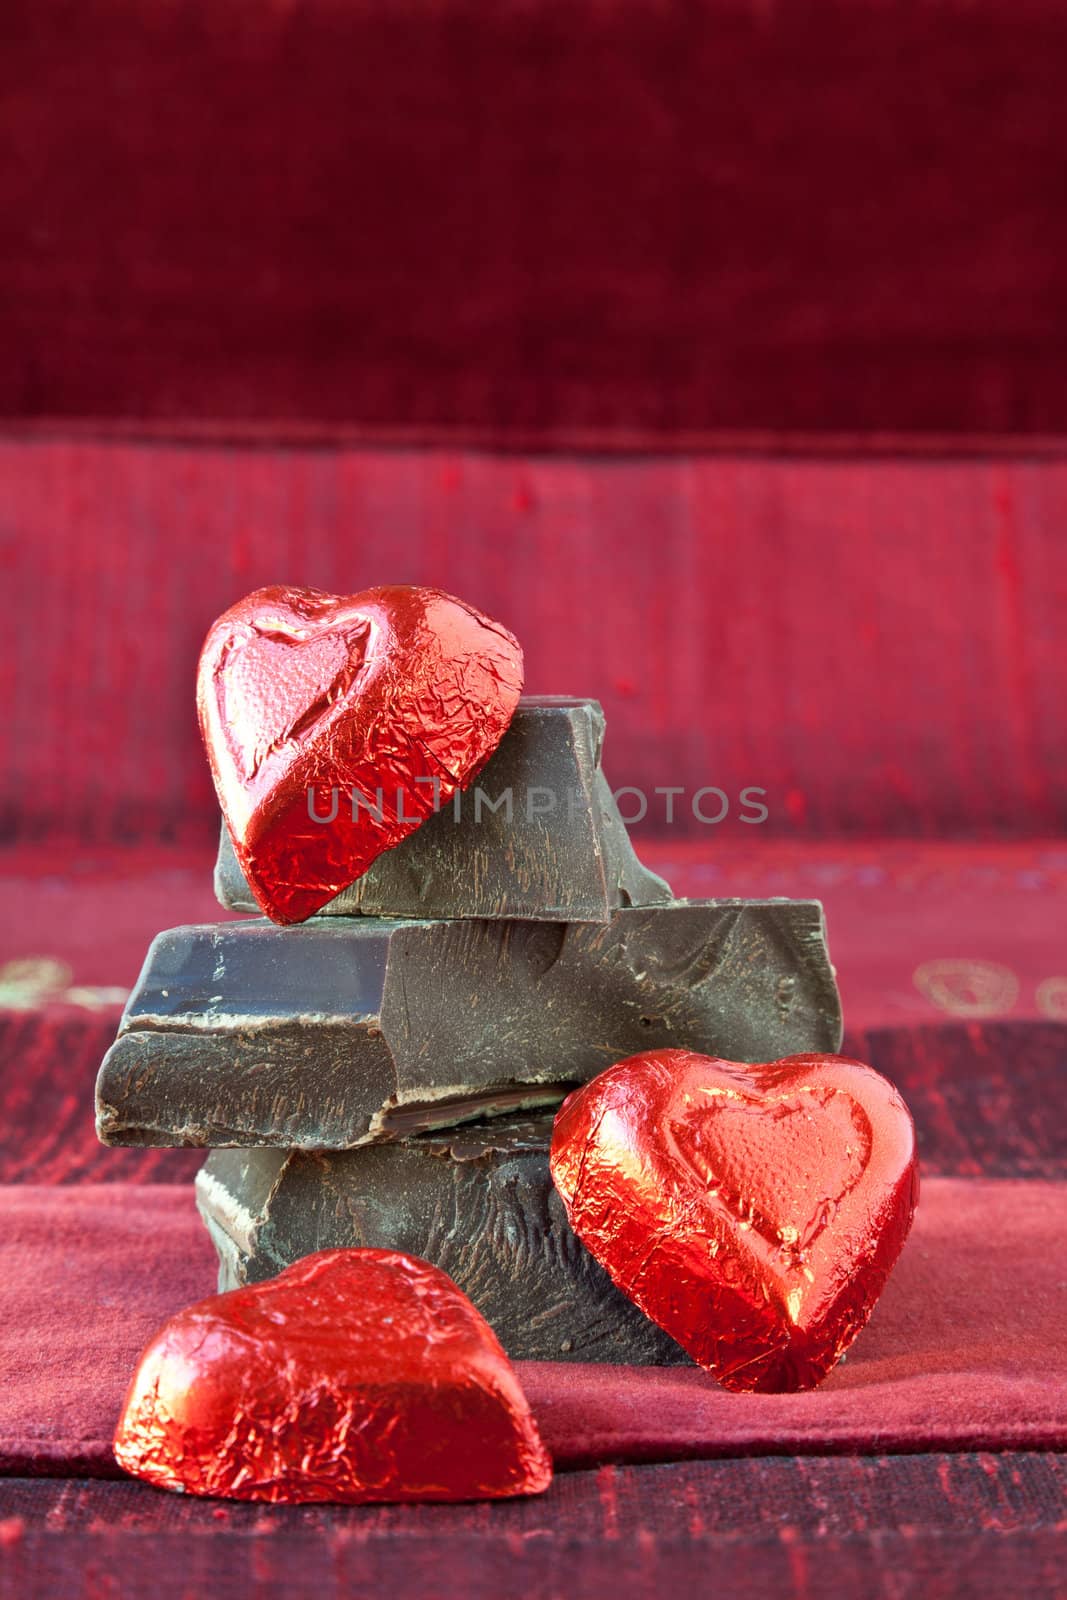 Candy Hearts on a Pile of Dark Chocolate Pieces by DashaRosato